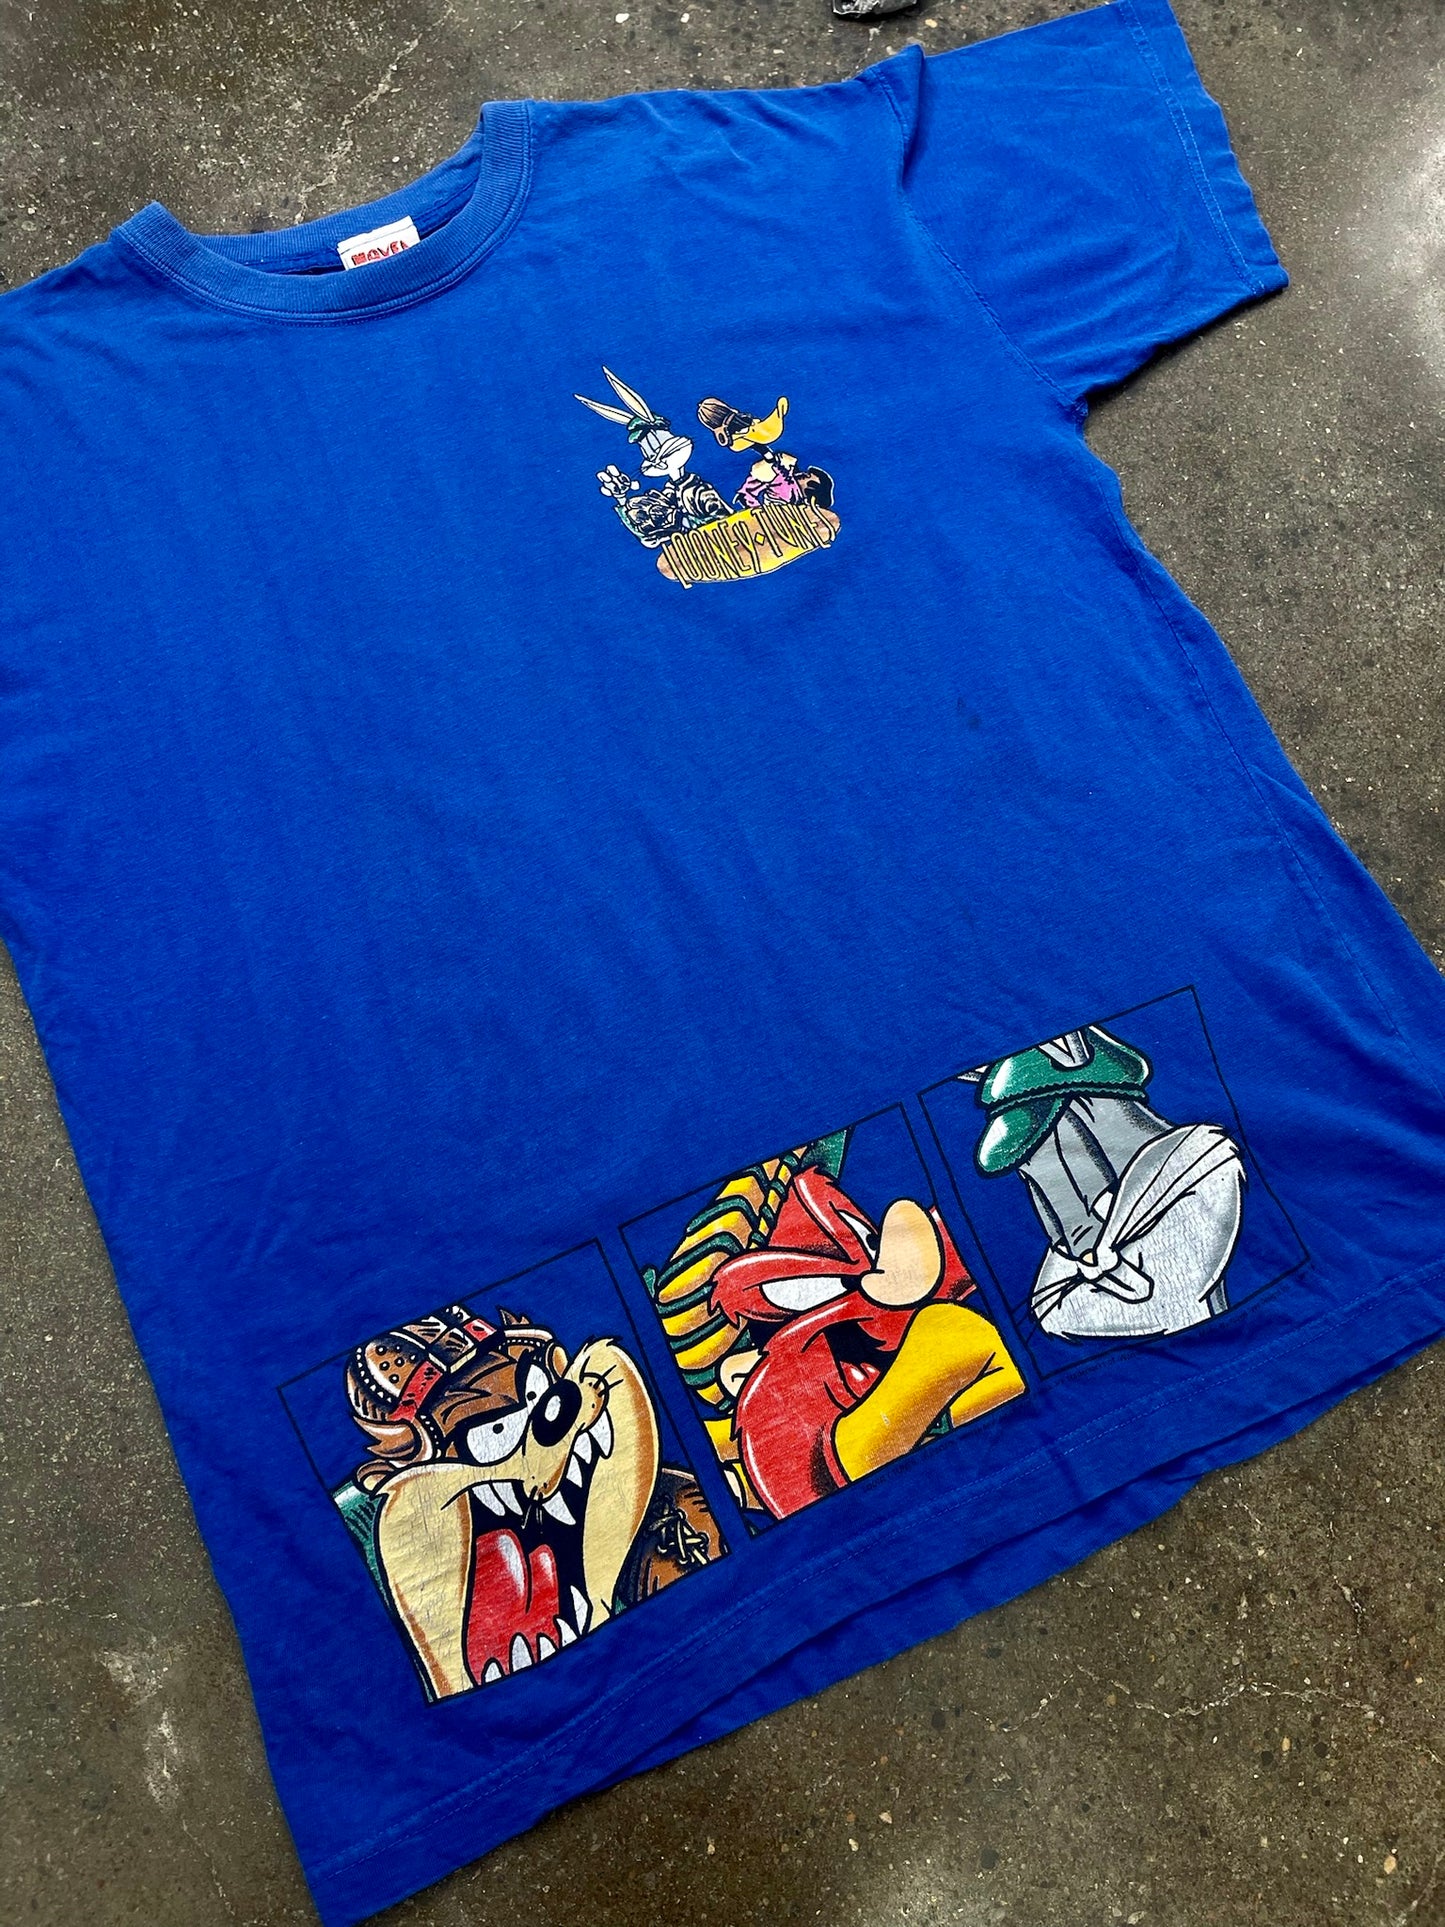 Vintage Looney Tunes Character Tee Size XL